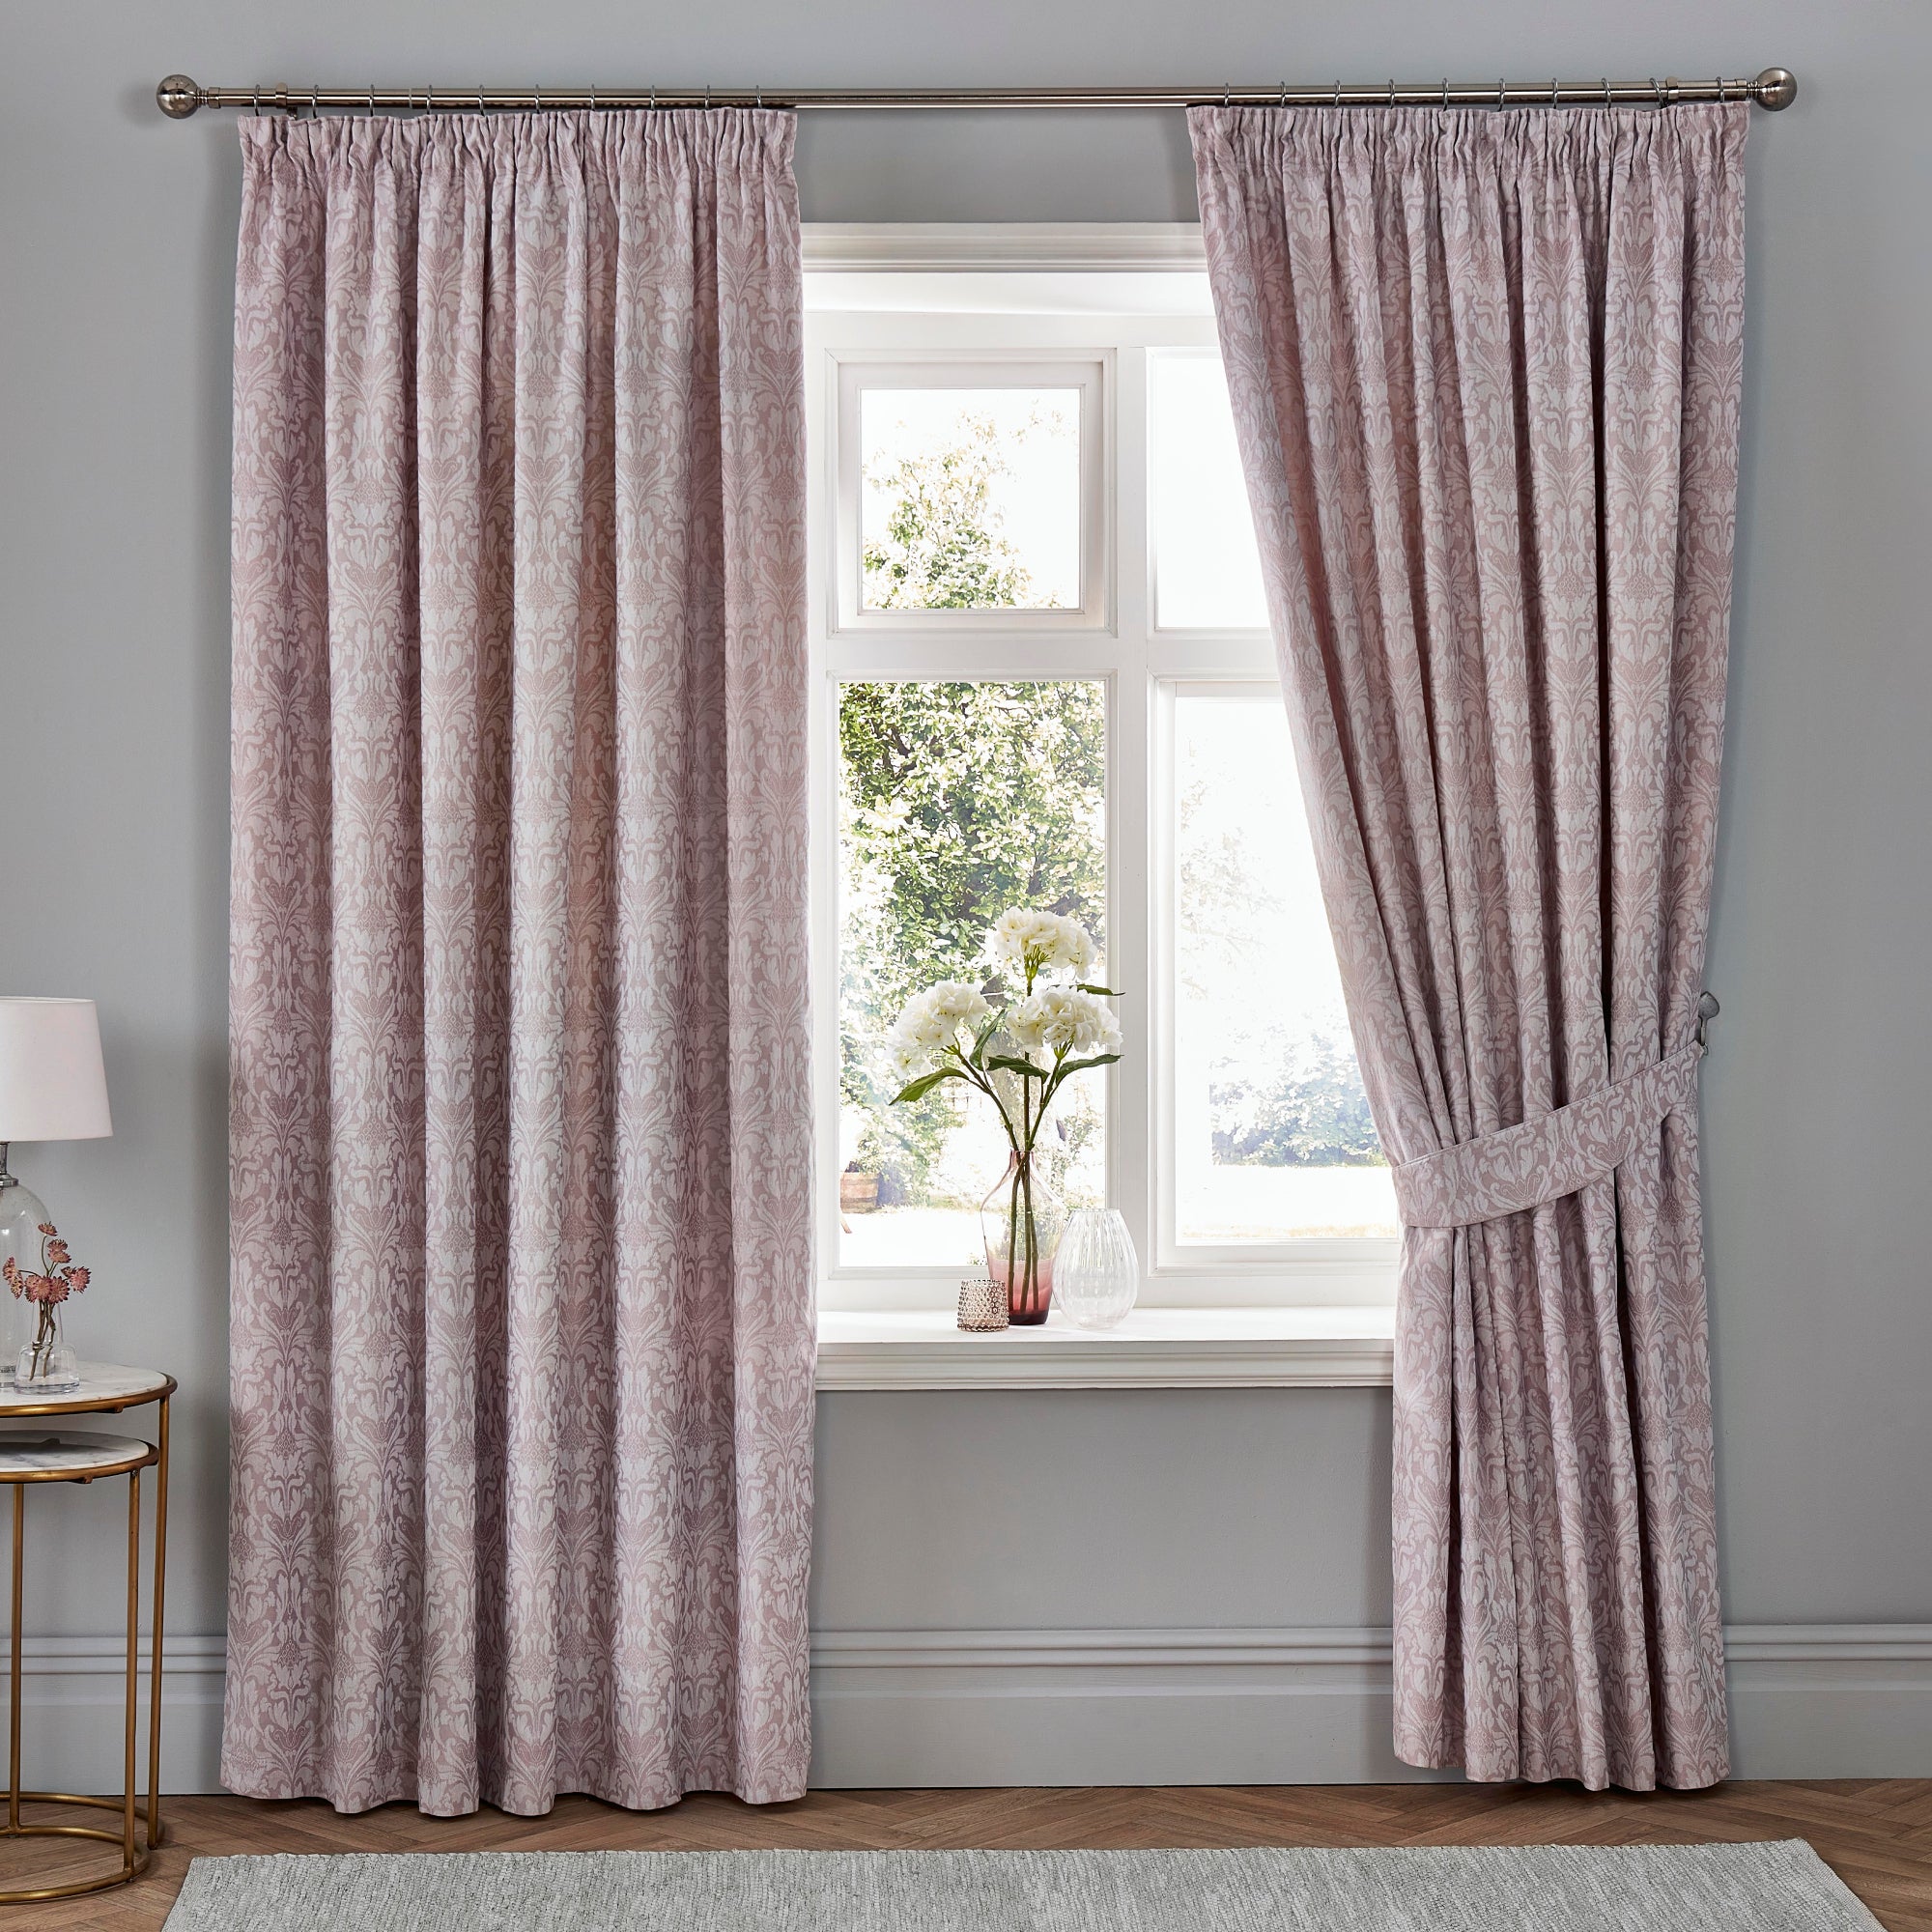 Pair of Pencil Pleat Curtains With Tie-Backs Hawthorne by Dreams & Drapes Woven in Lavender